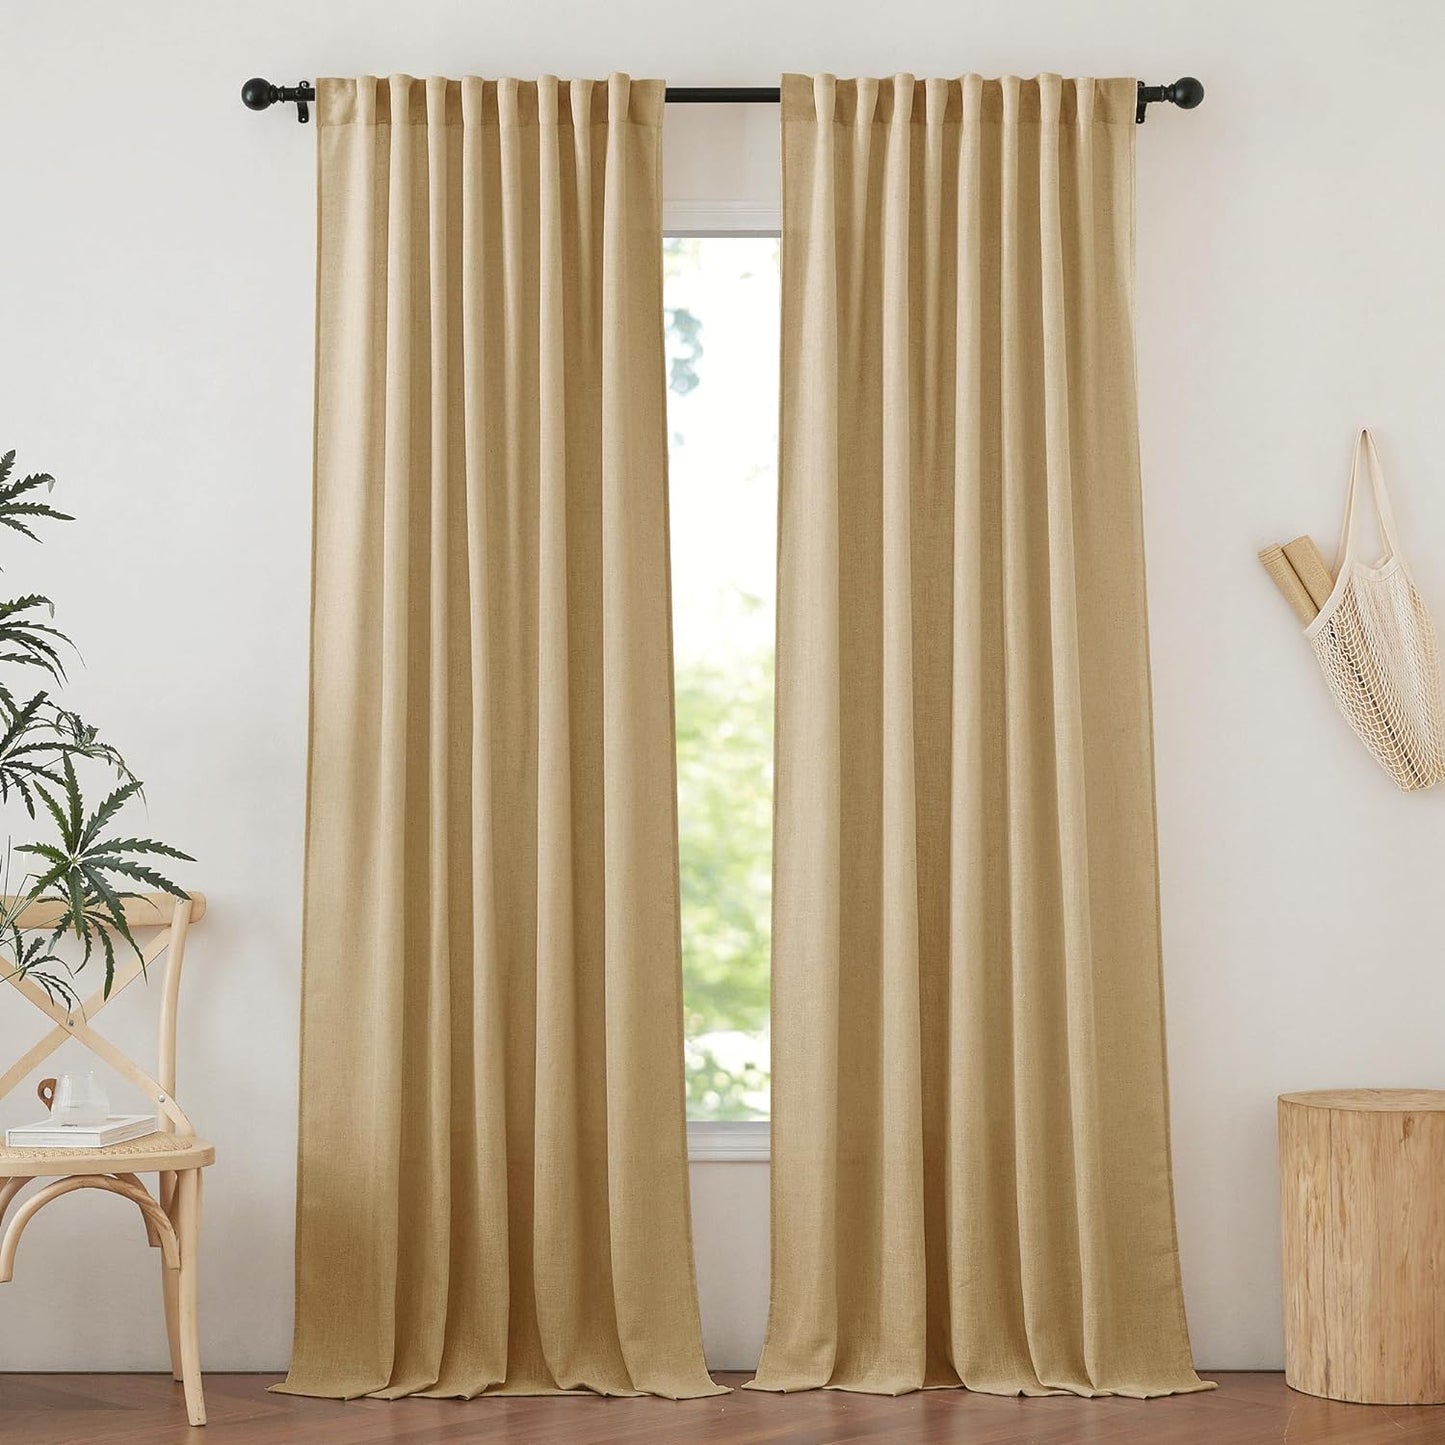 NICETOWN White Curtains Sheer - Semi Sheer Window Covering, Light & Airy Privacy Rod Pocket Back Tab Pinche Pleated Drapes for Bedroom Living Room Patio Glass Door, 52 X 63 Inches Long, Set of 2  NICETOWN Brown W52 X L84 